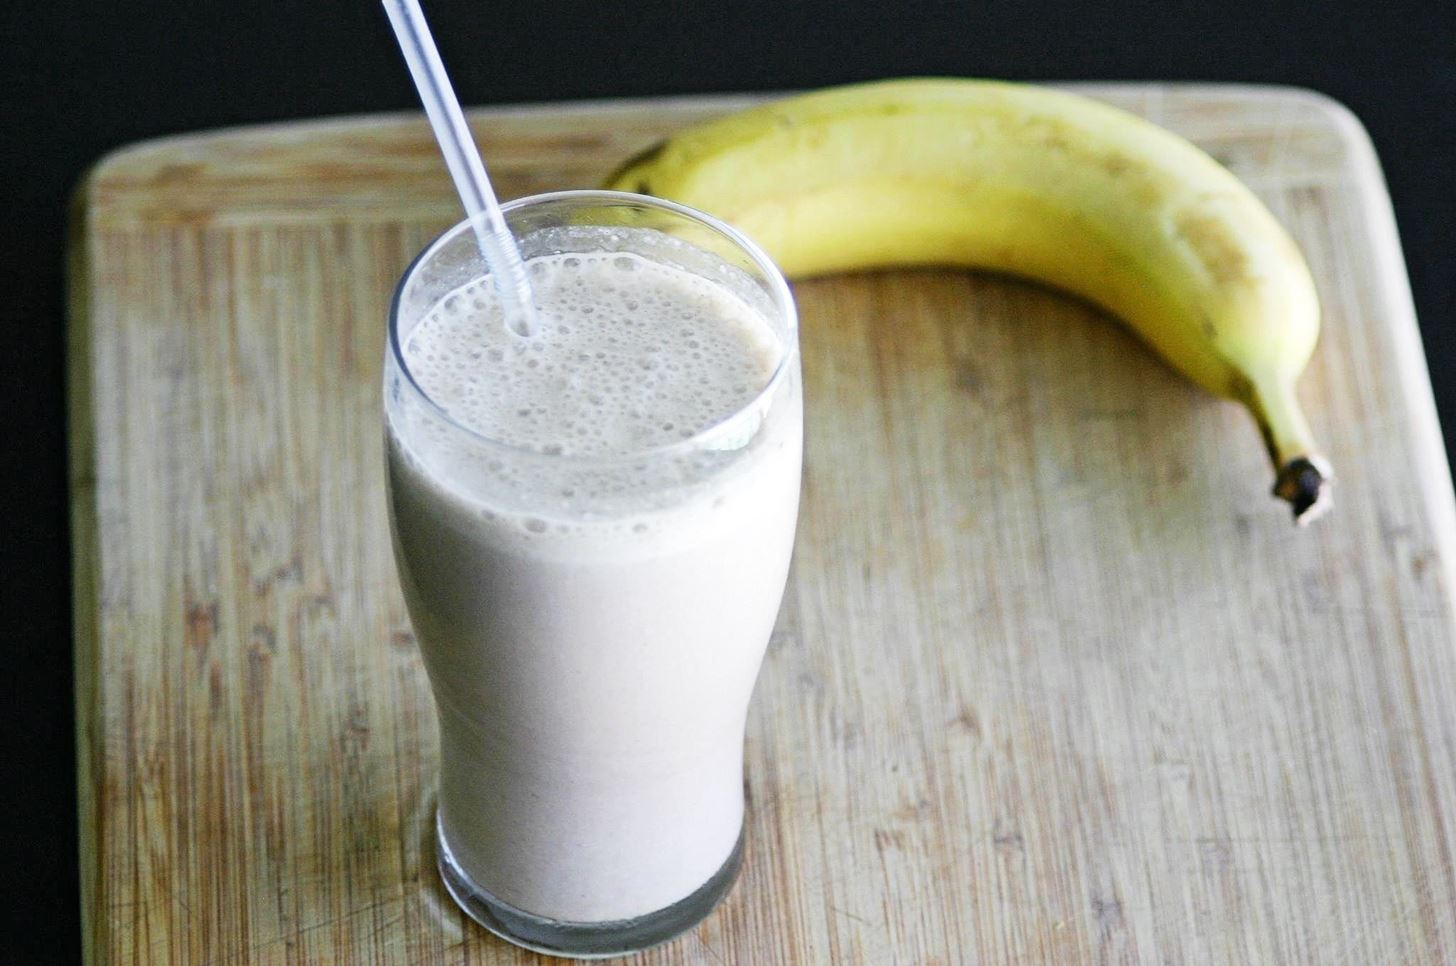 How & Why You Should Make Your Own Protein Powder